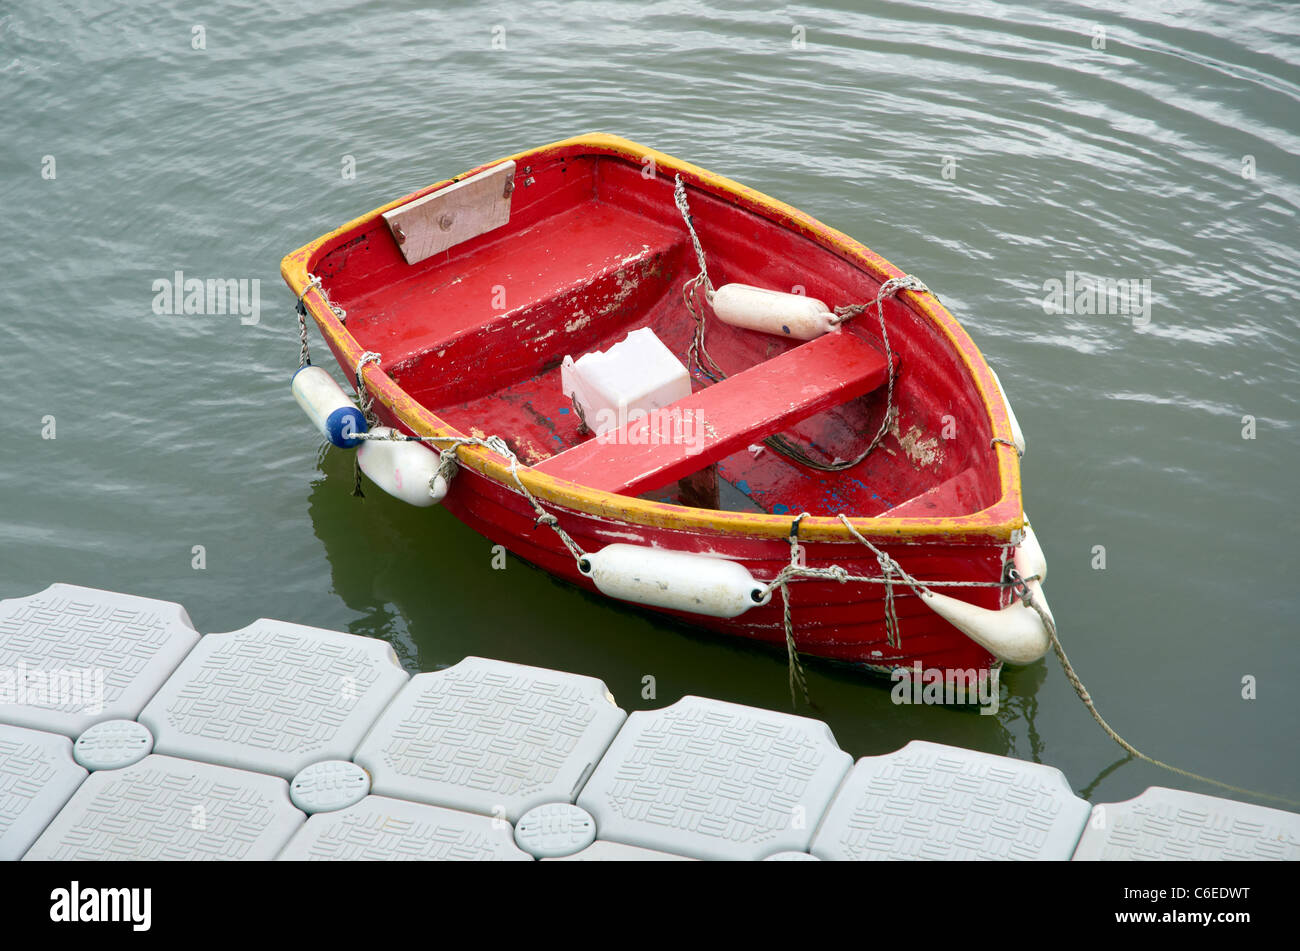 Two Small Boats Floating On River Stock Photo 1340221382, 60% OFF